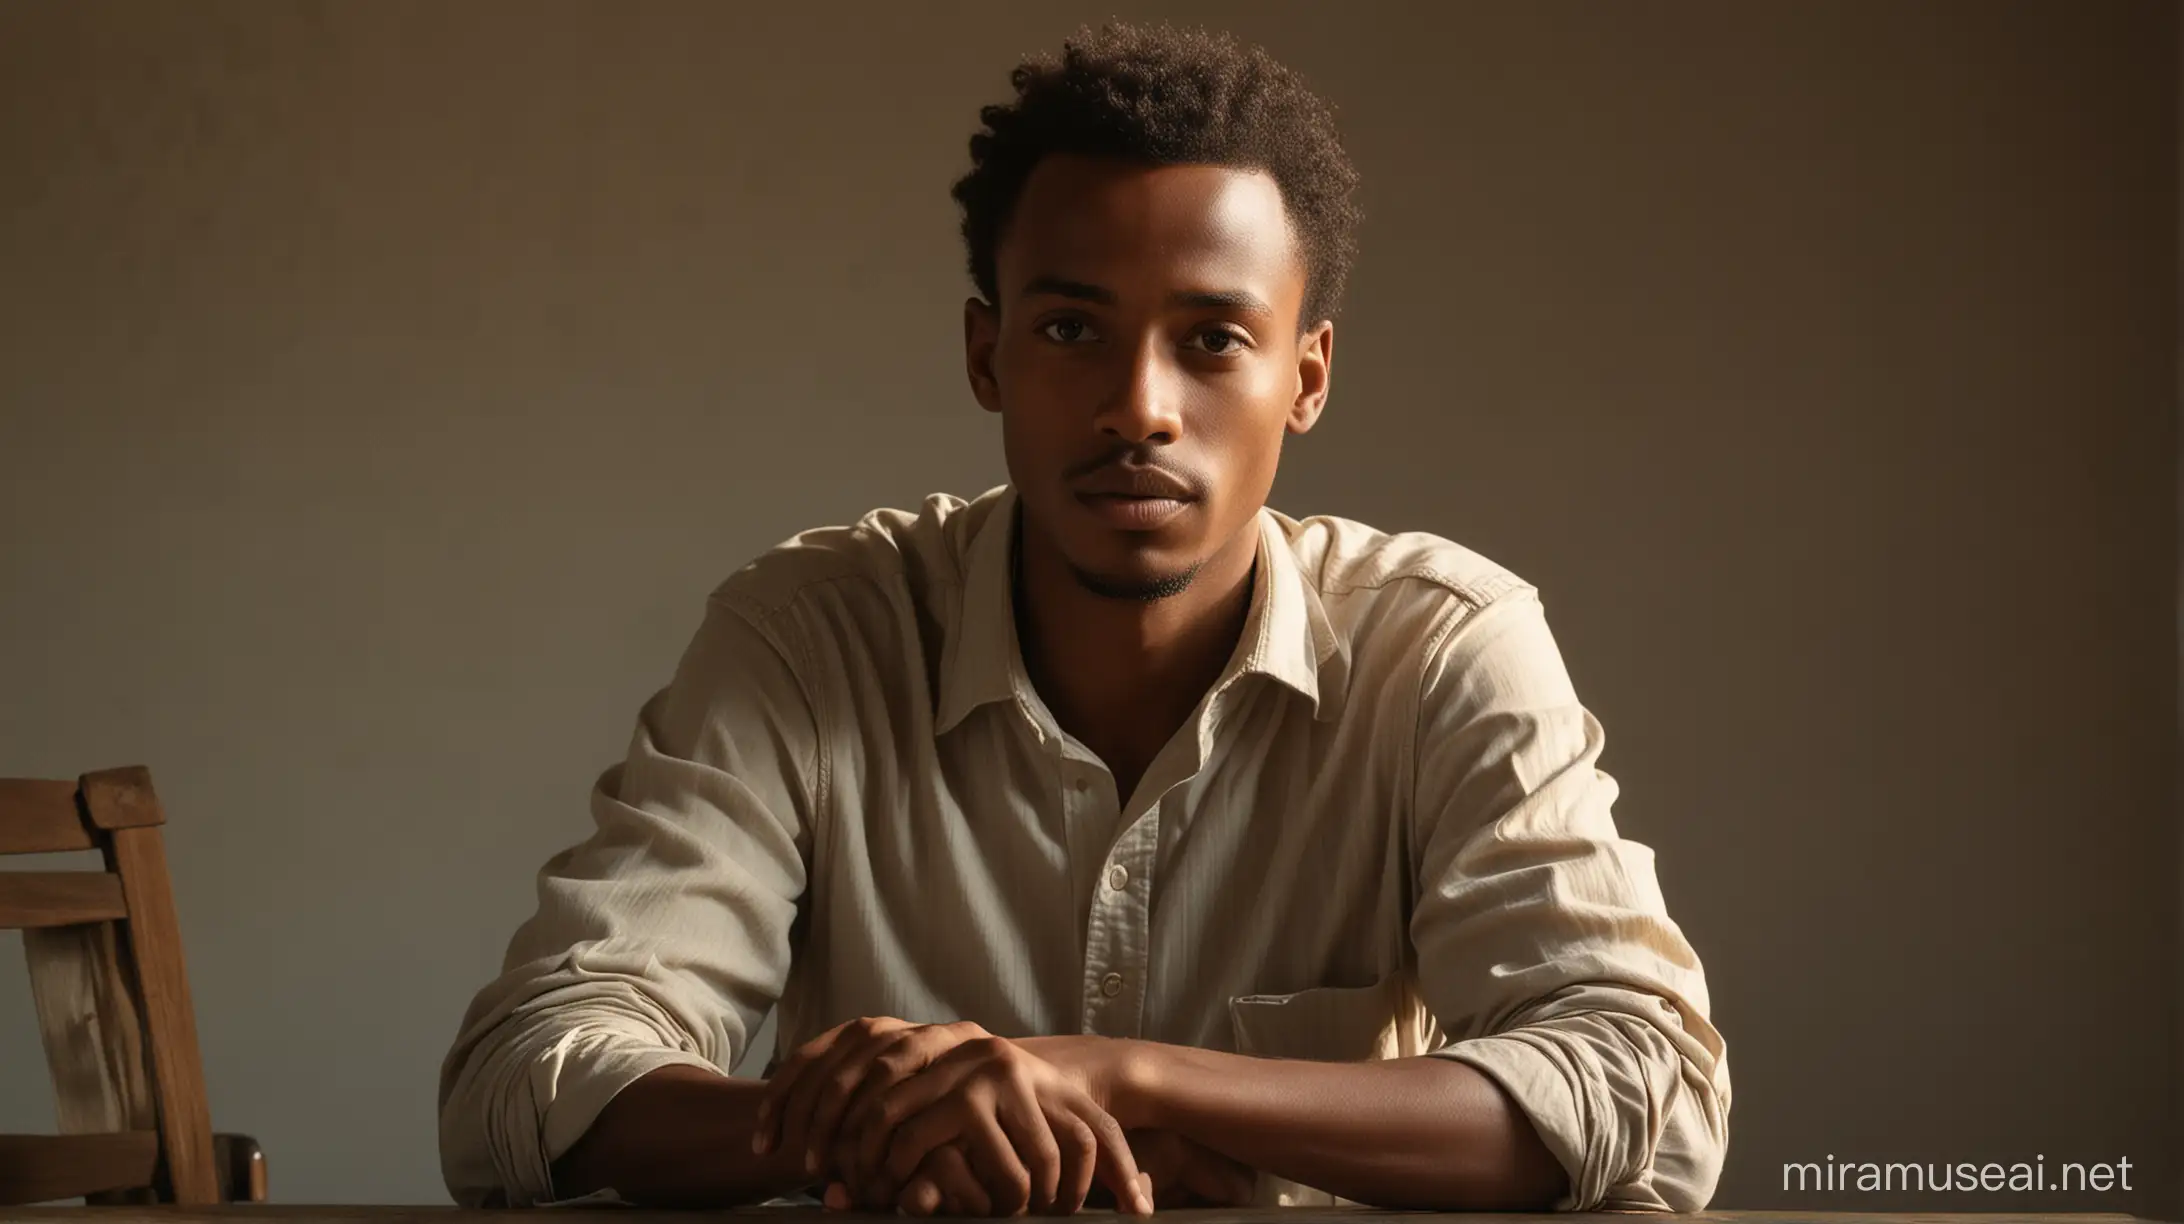 Ethiopian beautiful jourlists young man sitting on chair,looking straight forward,cinematic lighting,resolution 1280*720,the young man is in left side of the imagE.